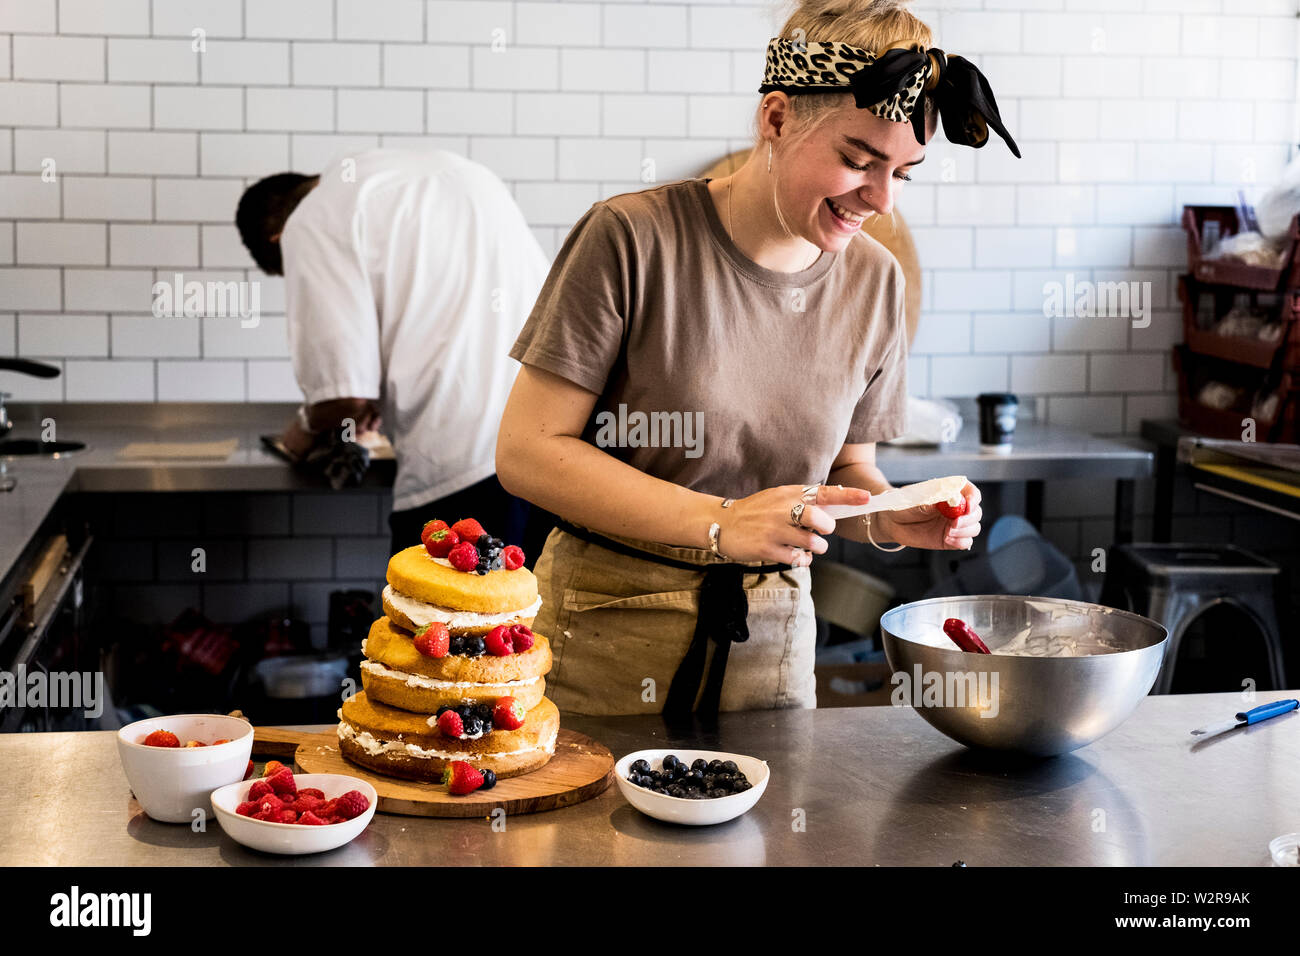 A cook working in a commercial kitchen assembling a layered sponge cake with fresh fruit. Stock Photo